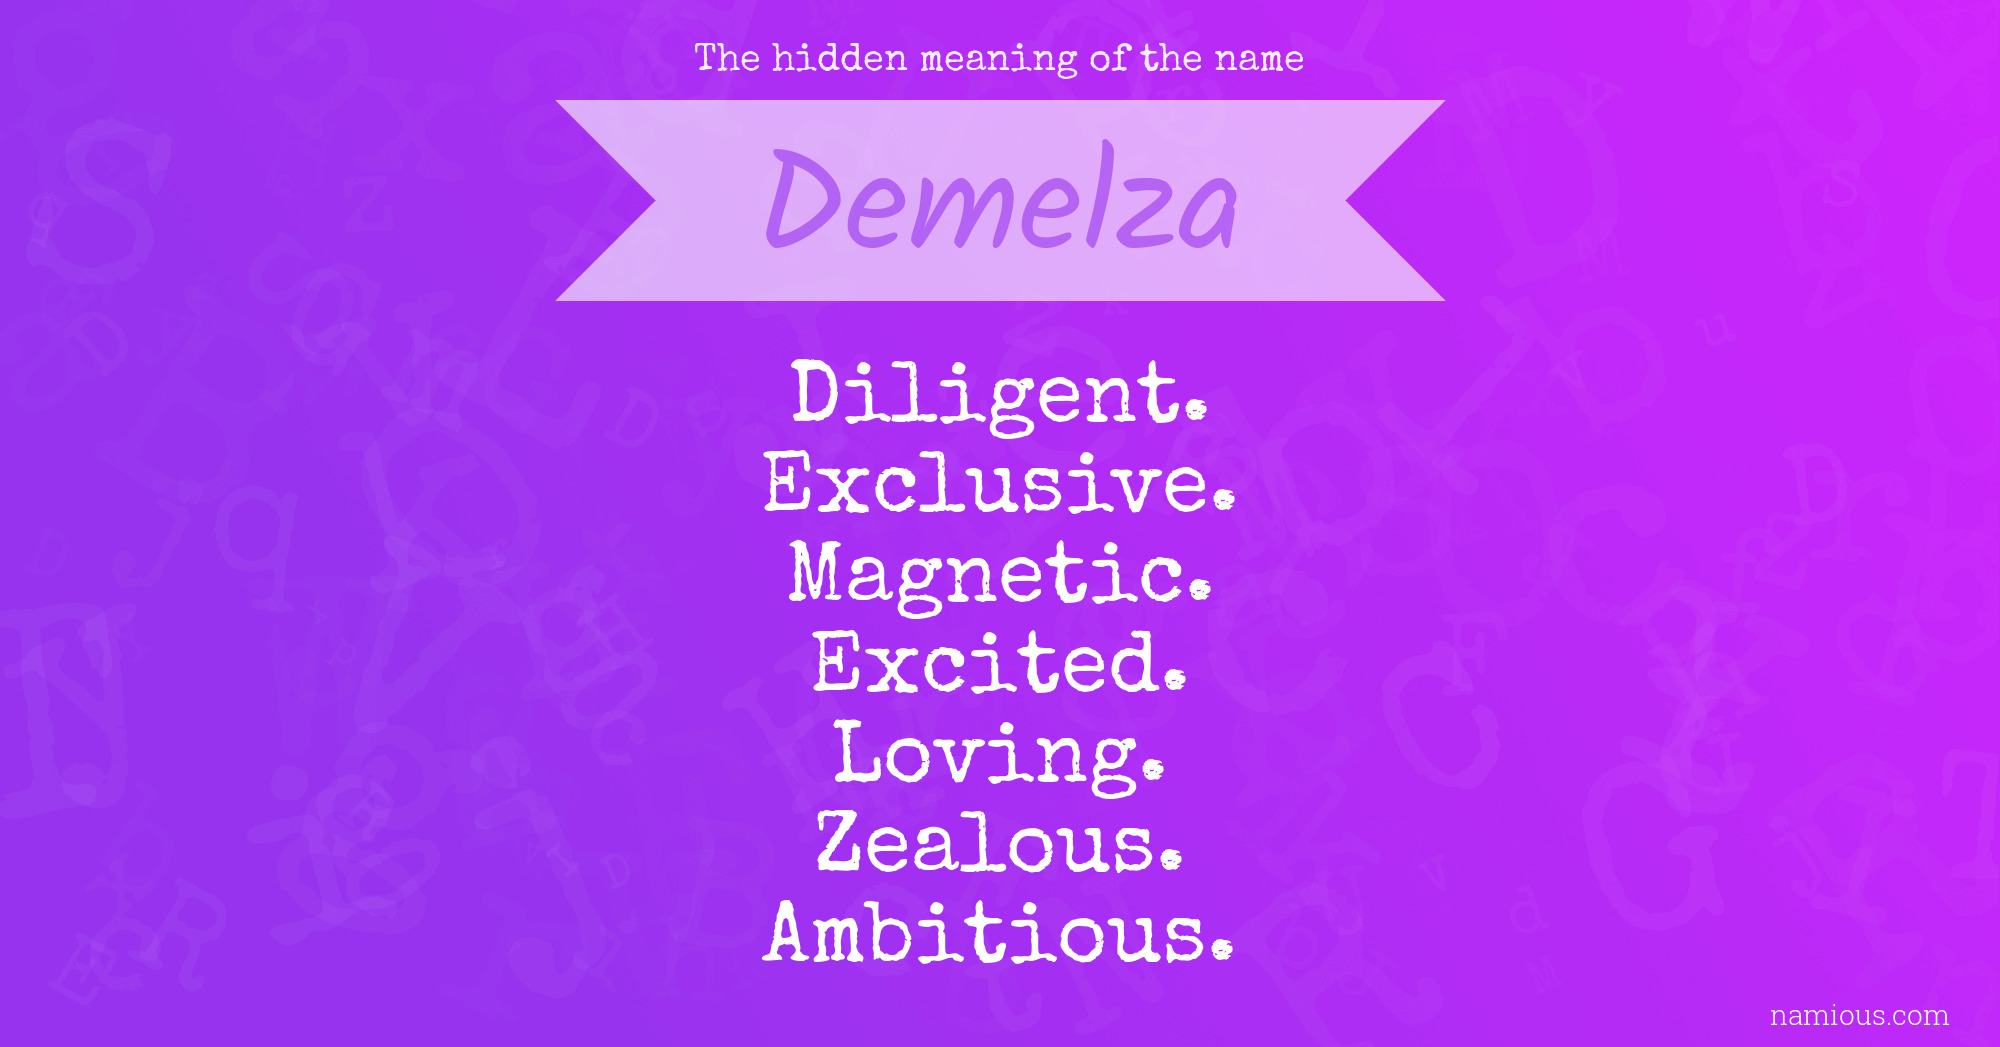 The hidden meaning of the name Demelza